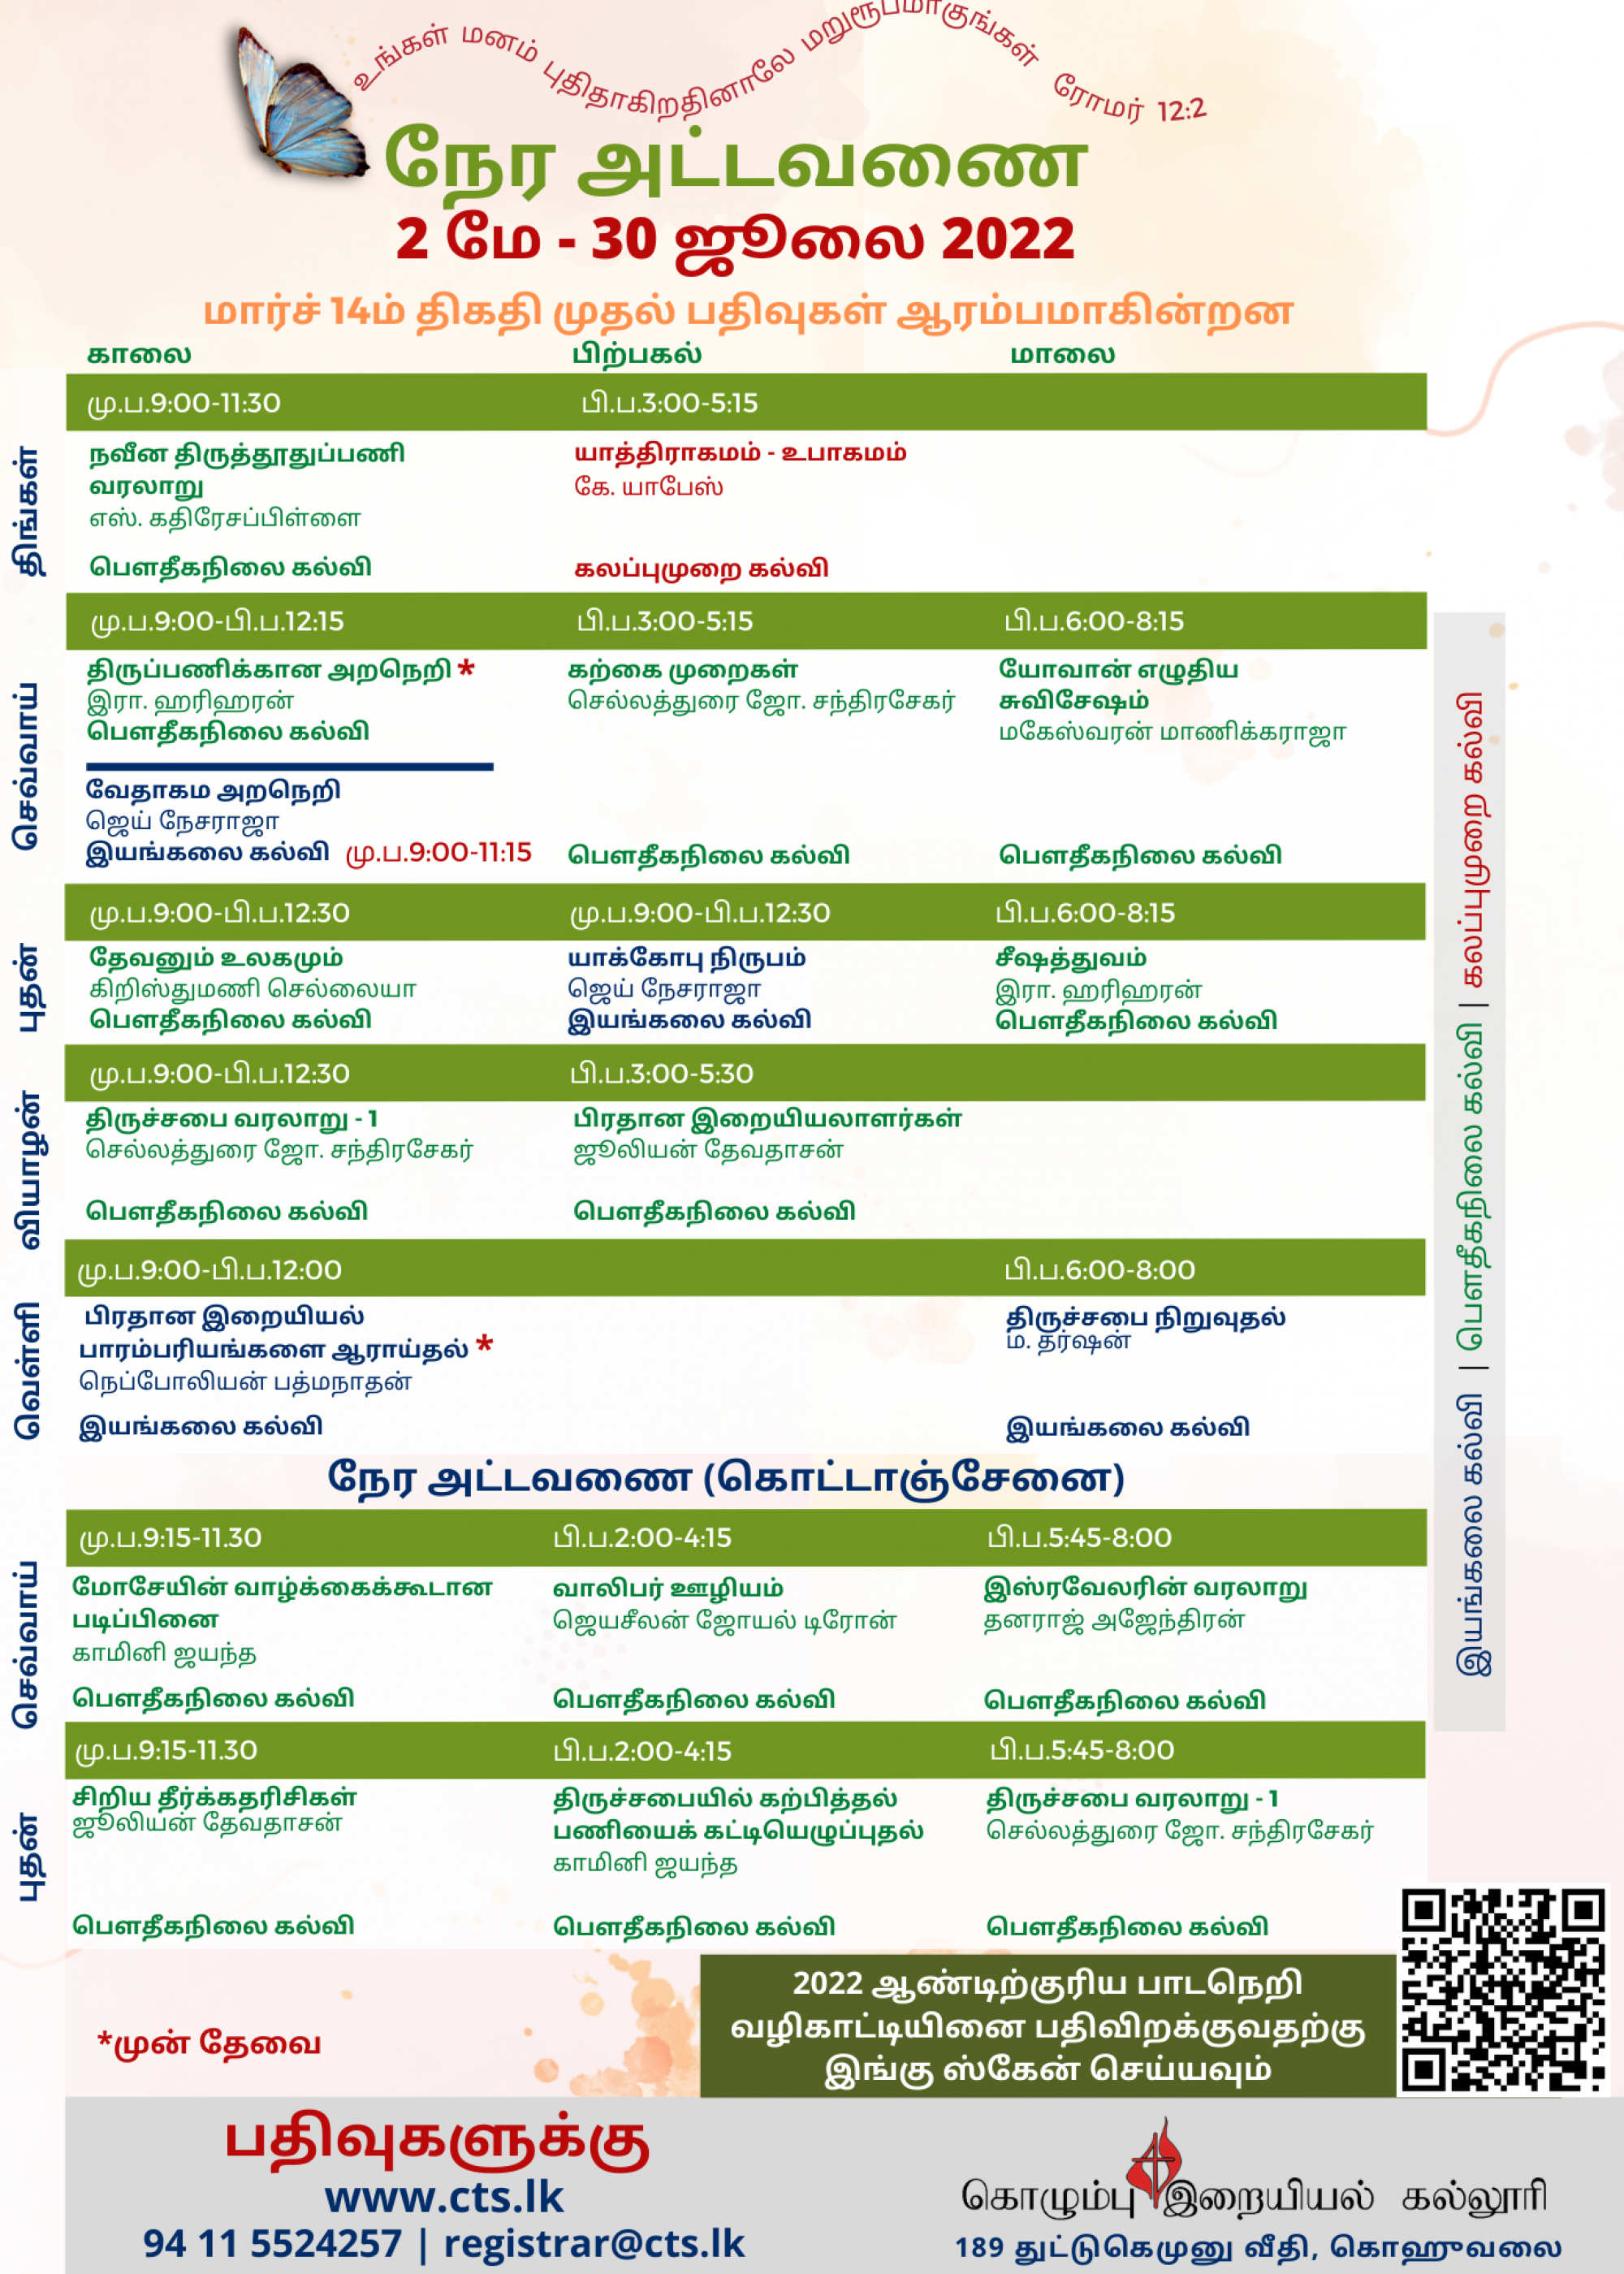 https://www.cts.lk/wp-content/uploads/2022/03/Tamil-2000x2800.png